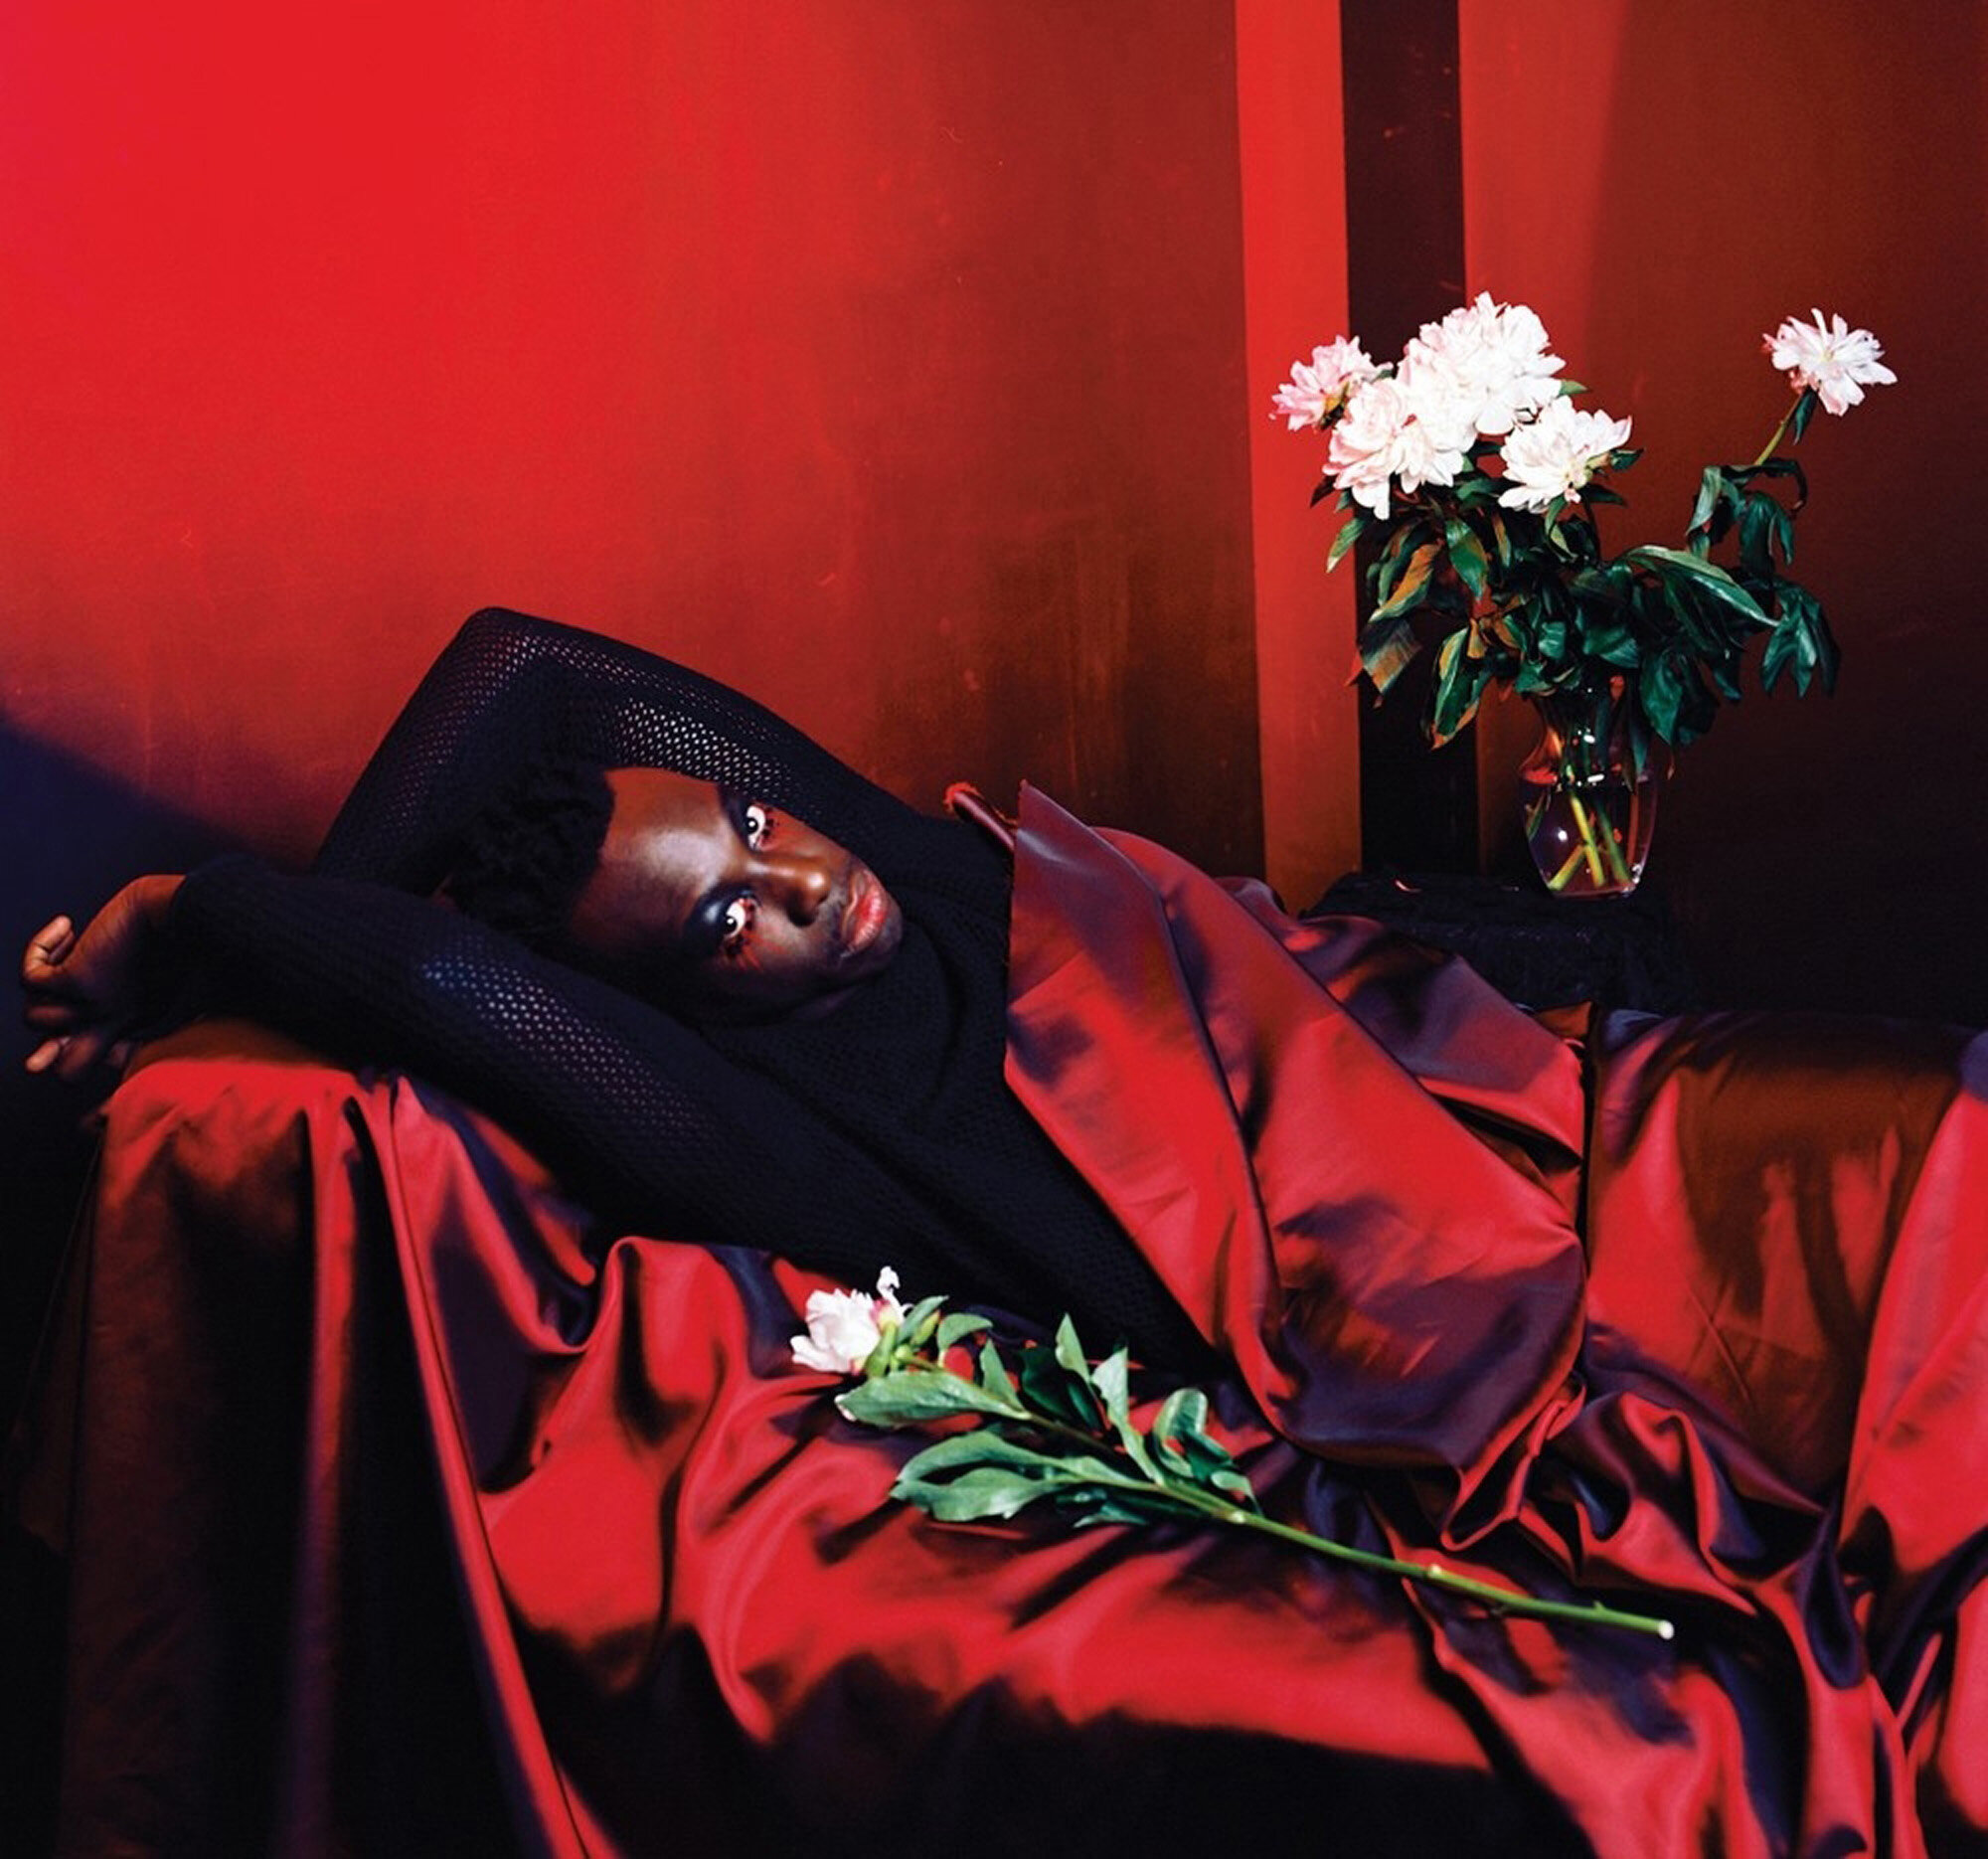  Le1f (Khalif Diouf) for VICE 